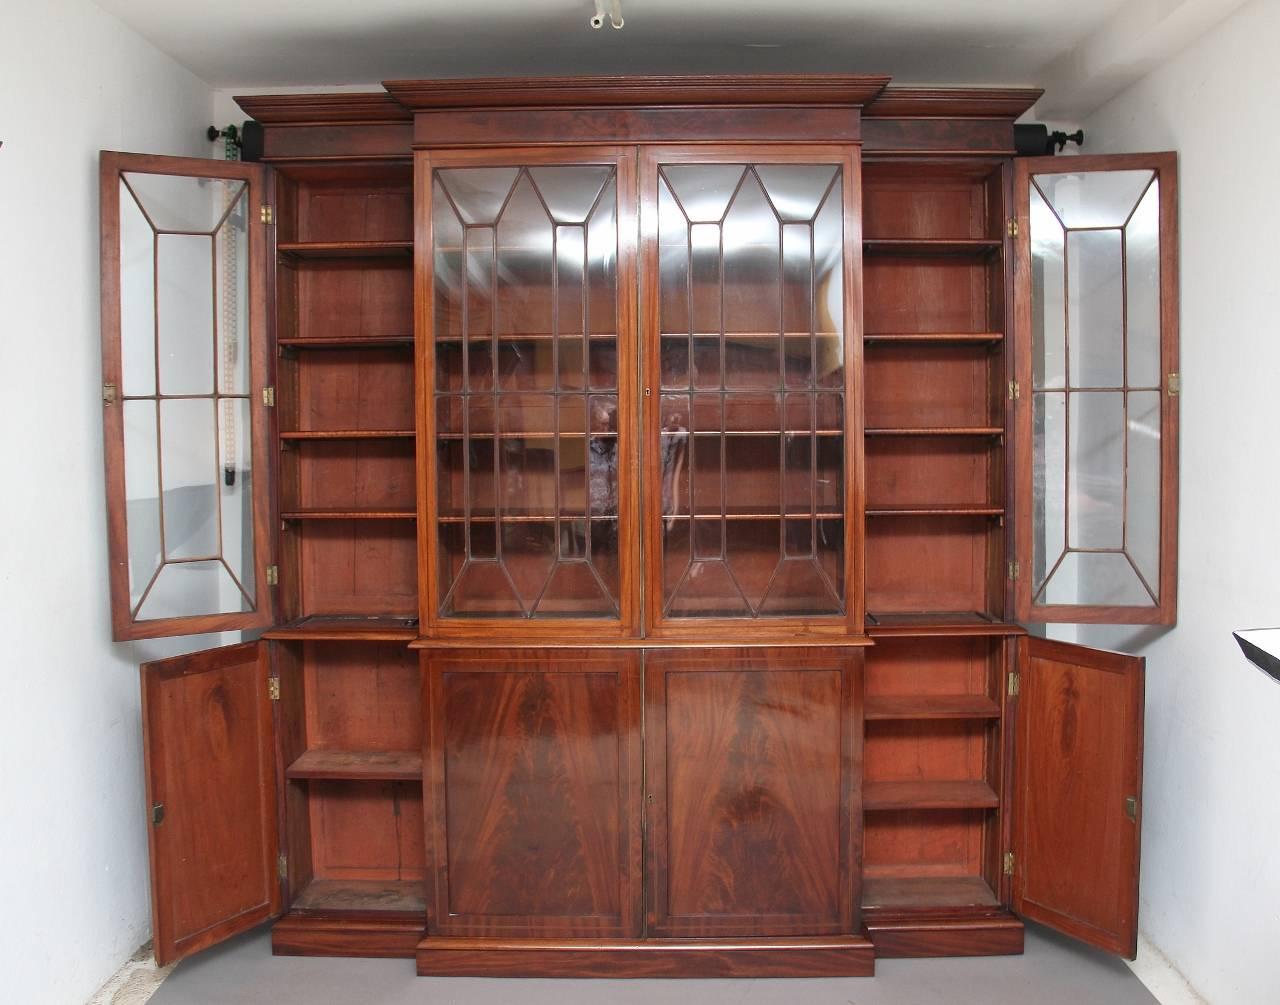 19th century four door mahogany breakfront bookcase, the moulded cornice above four astragal glazed doors opening to reveal four adjustable shelves in each section, the bottom section having four cupboards with flame mahogany panel doors, the